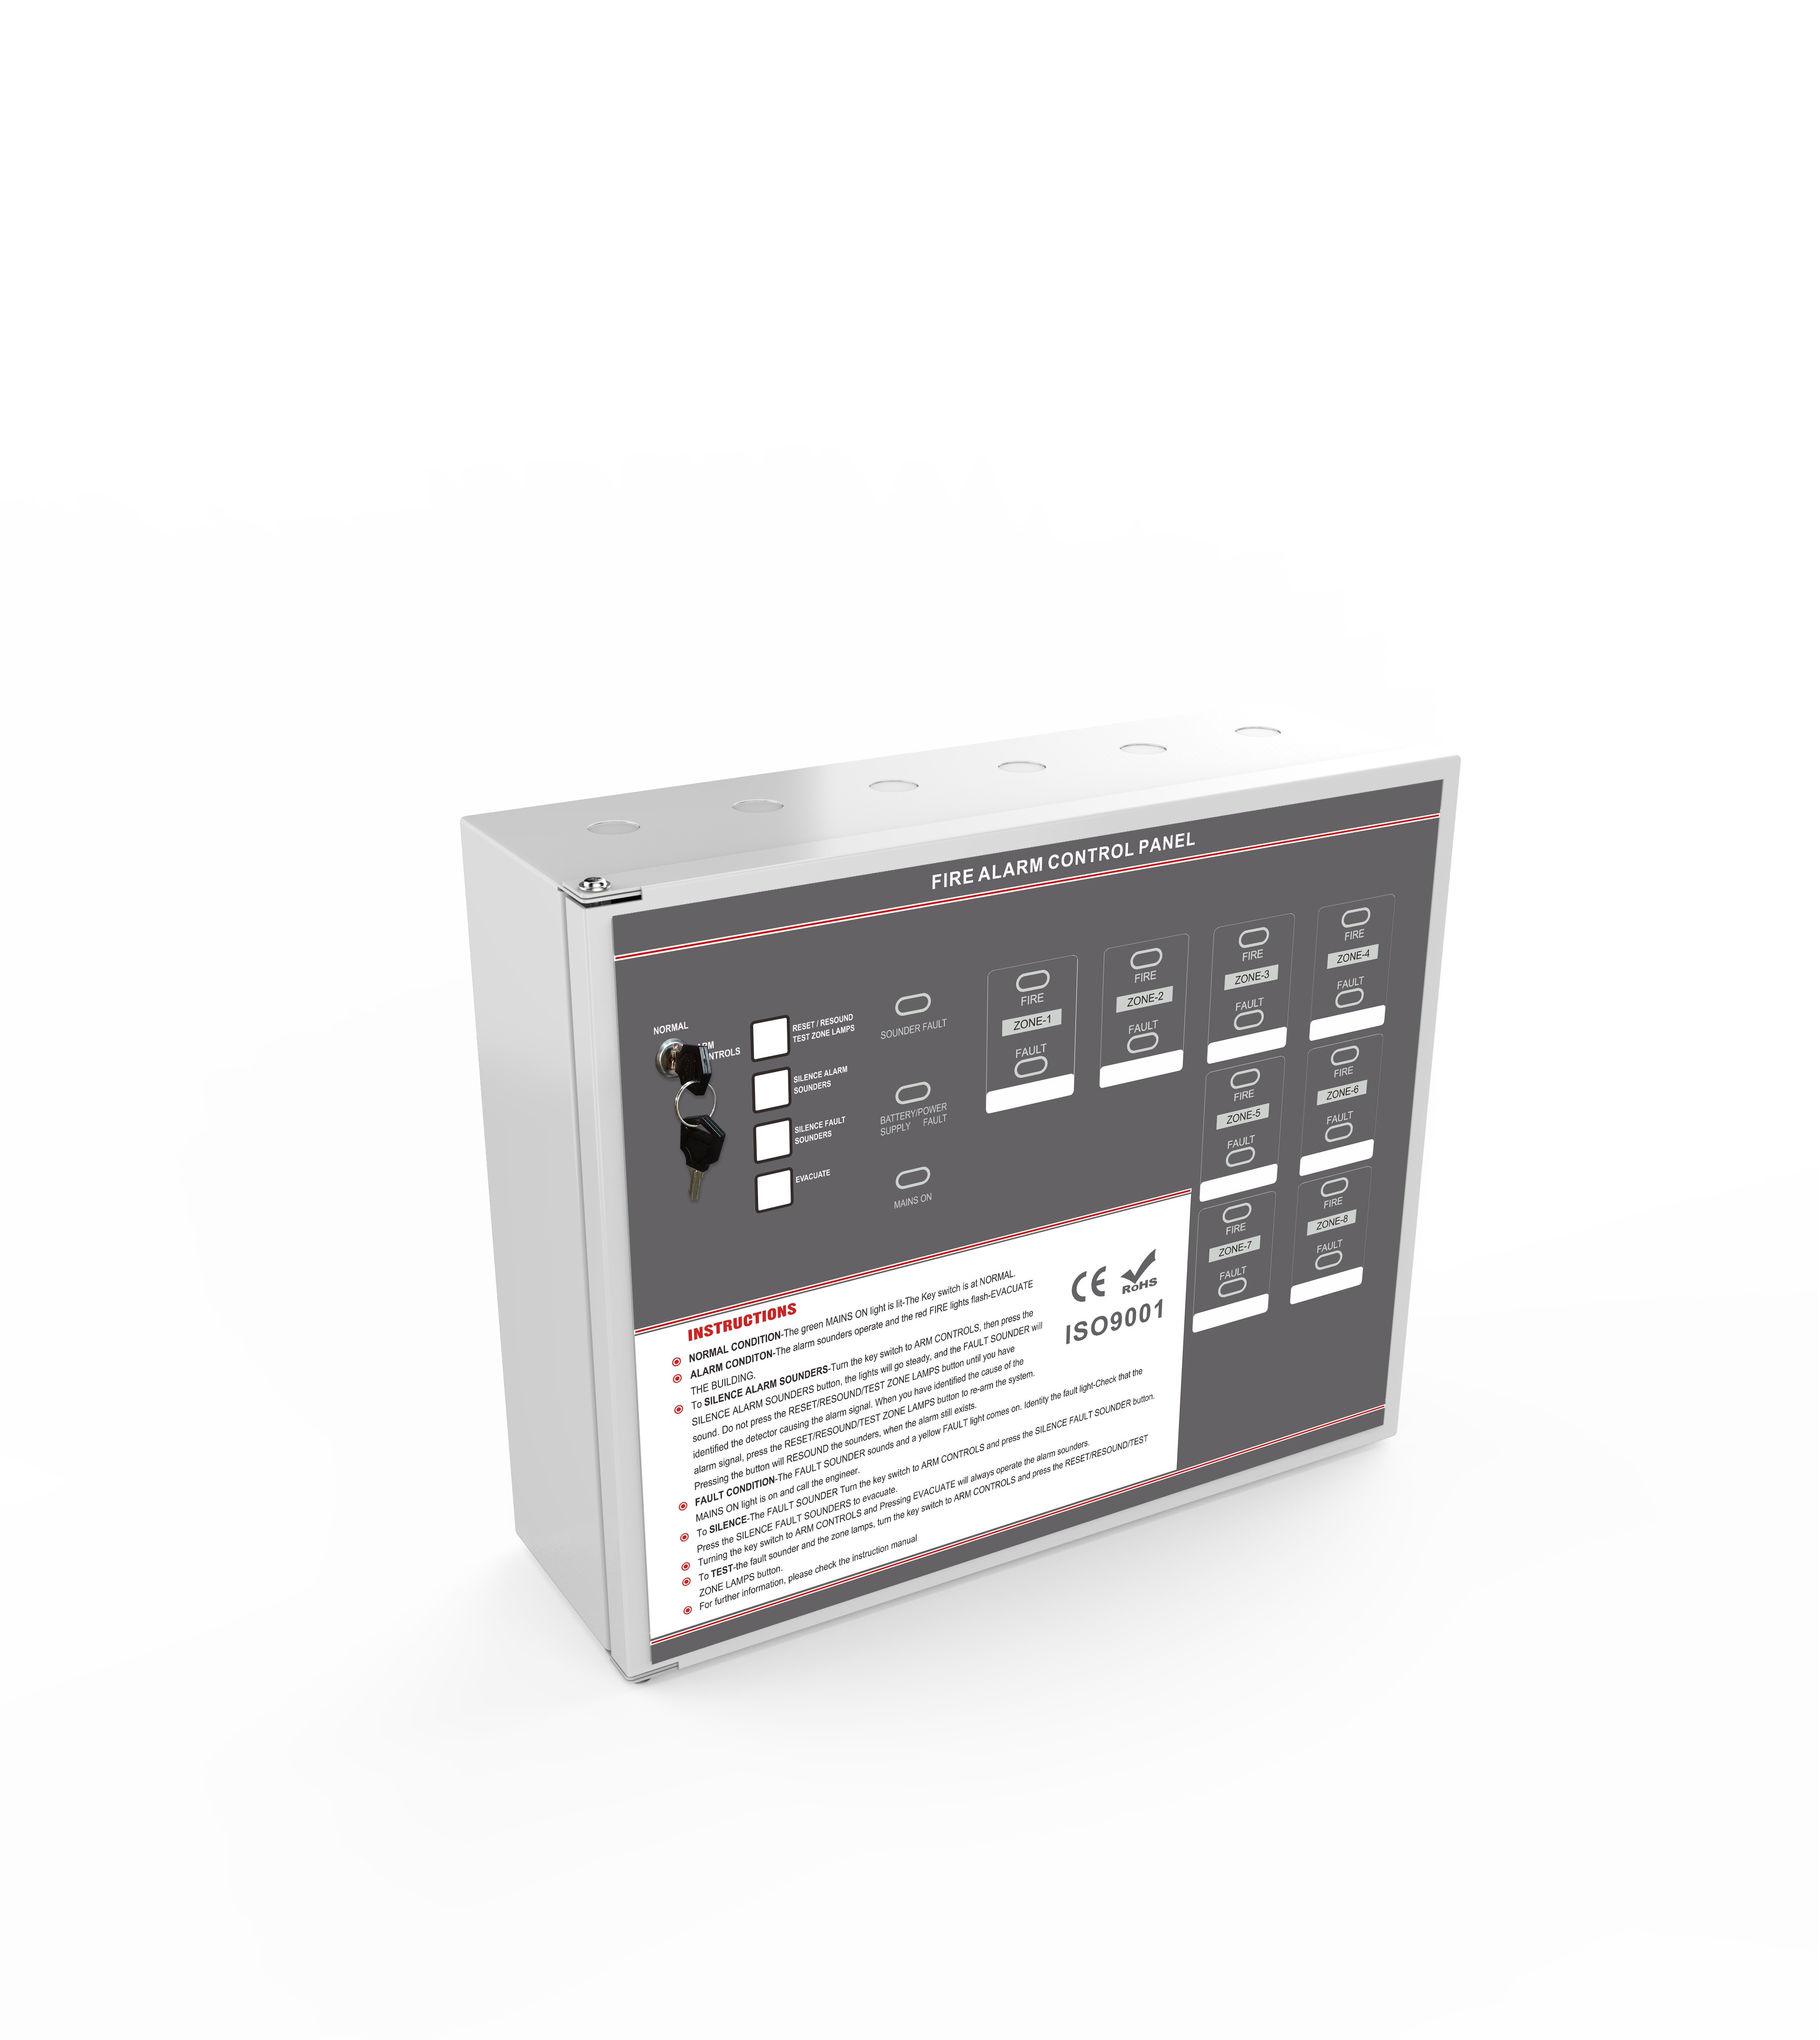 6 zone conventional fire alarm control panel for fire alarm system